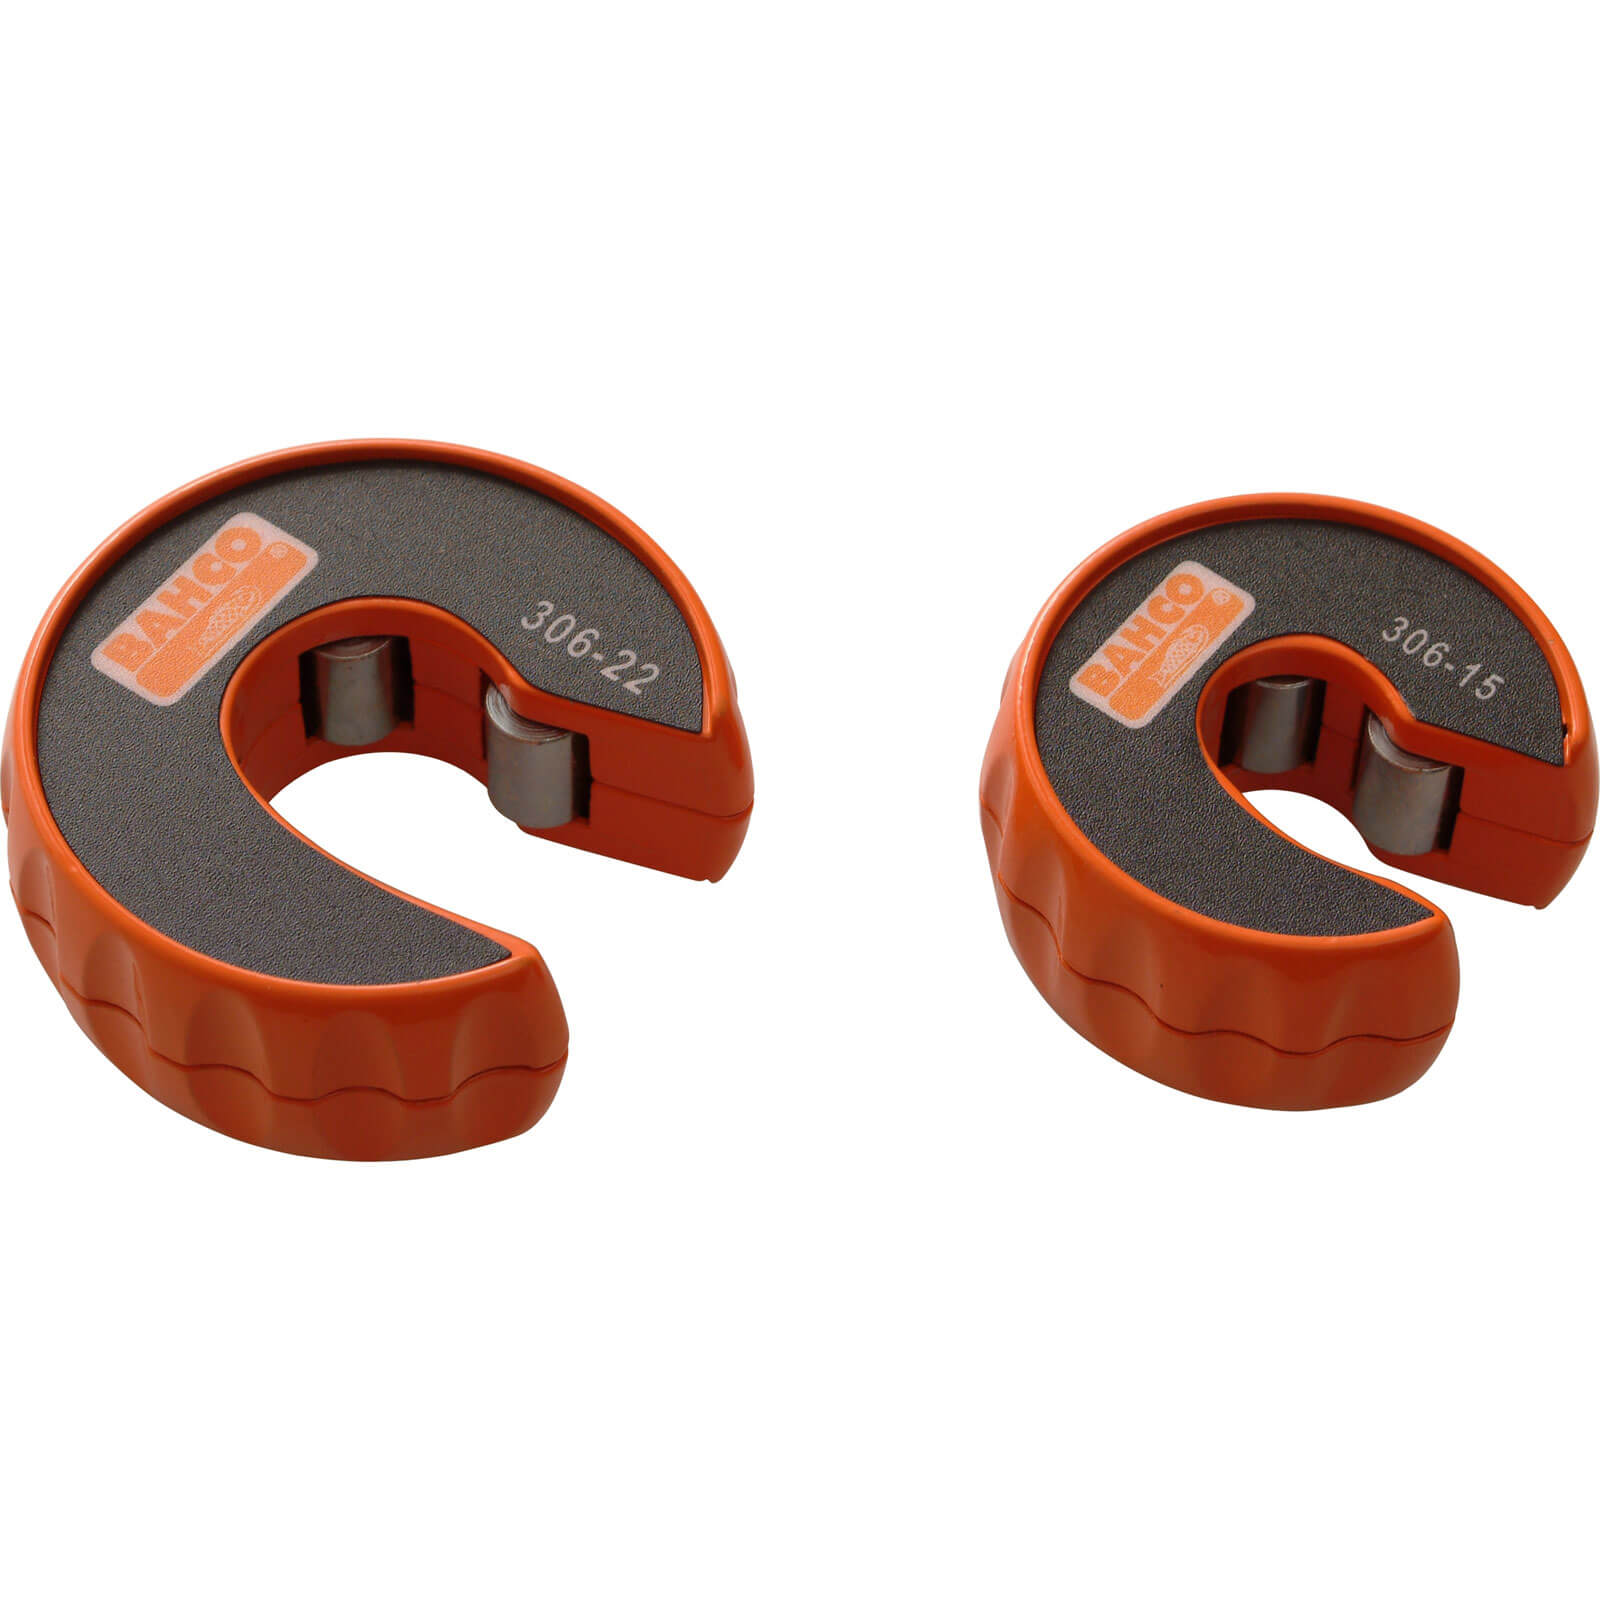 Bahco Automatic Pipe Cutter 15mm & 22mm Pack of 2